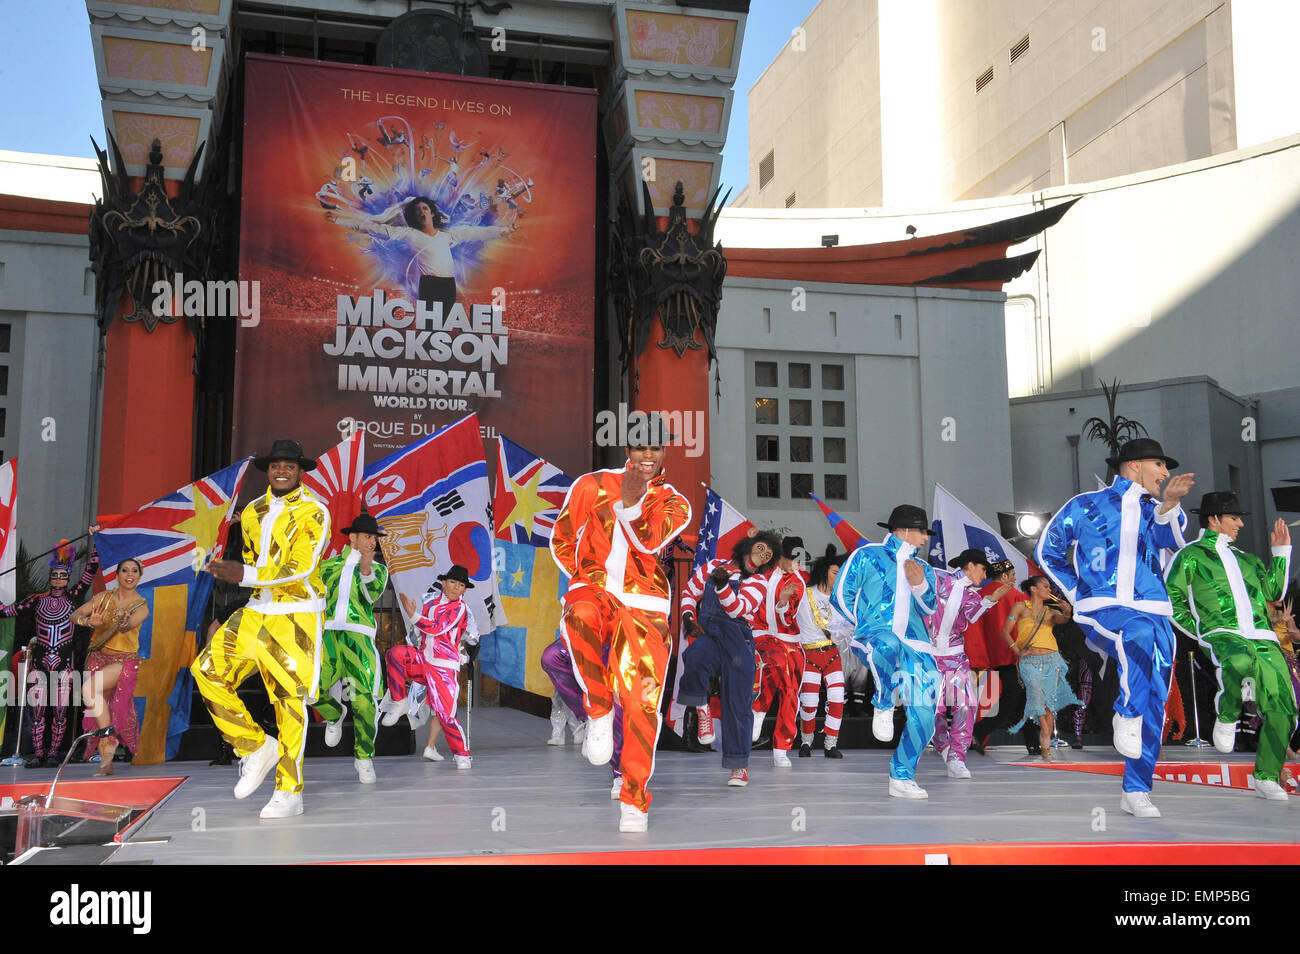 LOS ANGELES, CA - JANUARY 26, 2012: Performers at the memorial celebration for Michael Jackson at Grauman's Chinese Theatre. Cirque du Soleil's new show 'Michael Jackson THE IMMORTAL World Tour' premieres in Los Angeles tomorrow. January 26, 2012 Los Angeles, CA Stock Photo